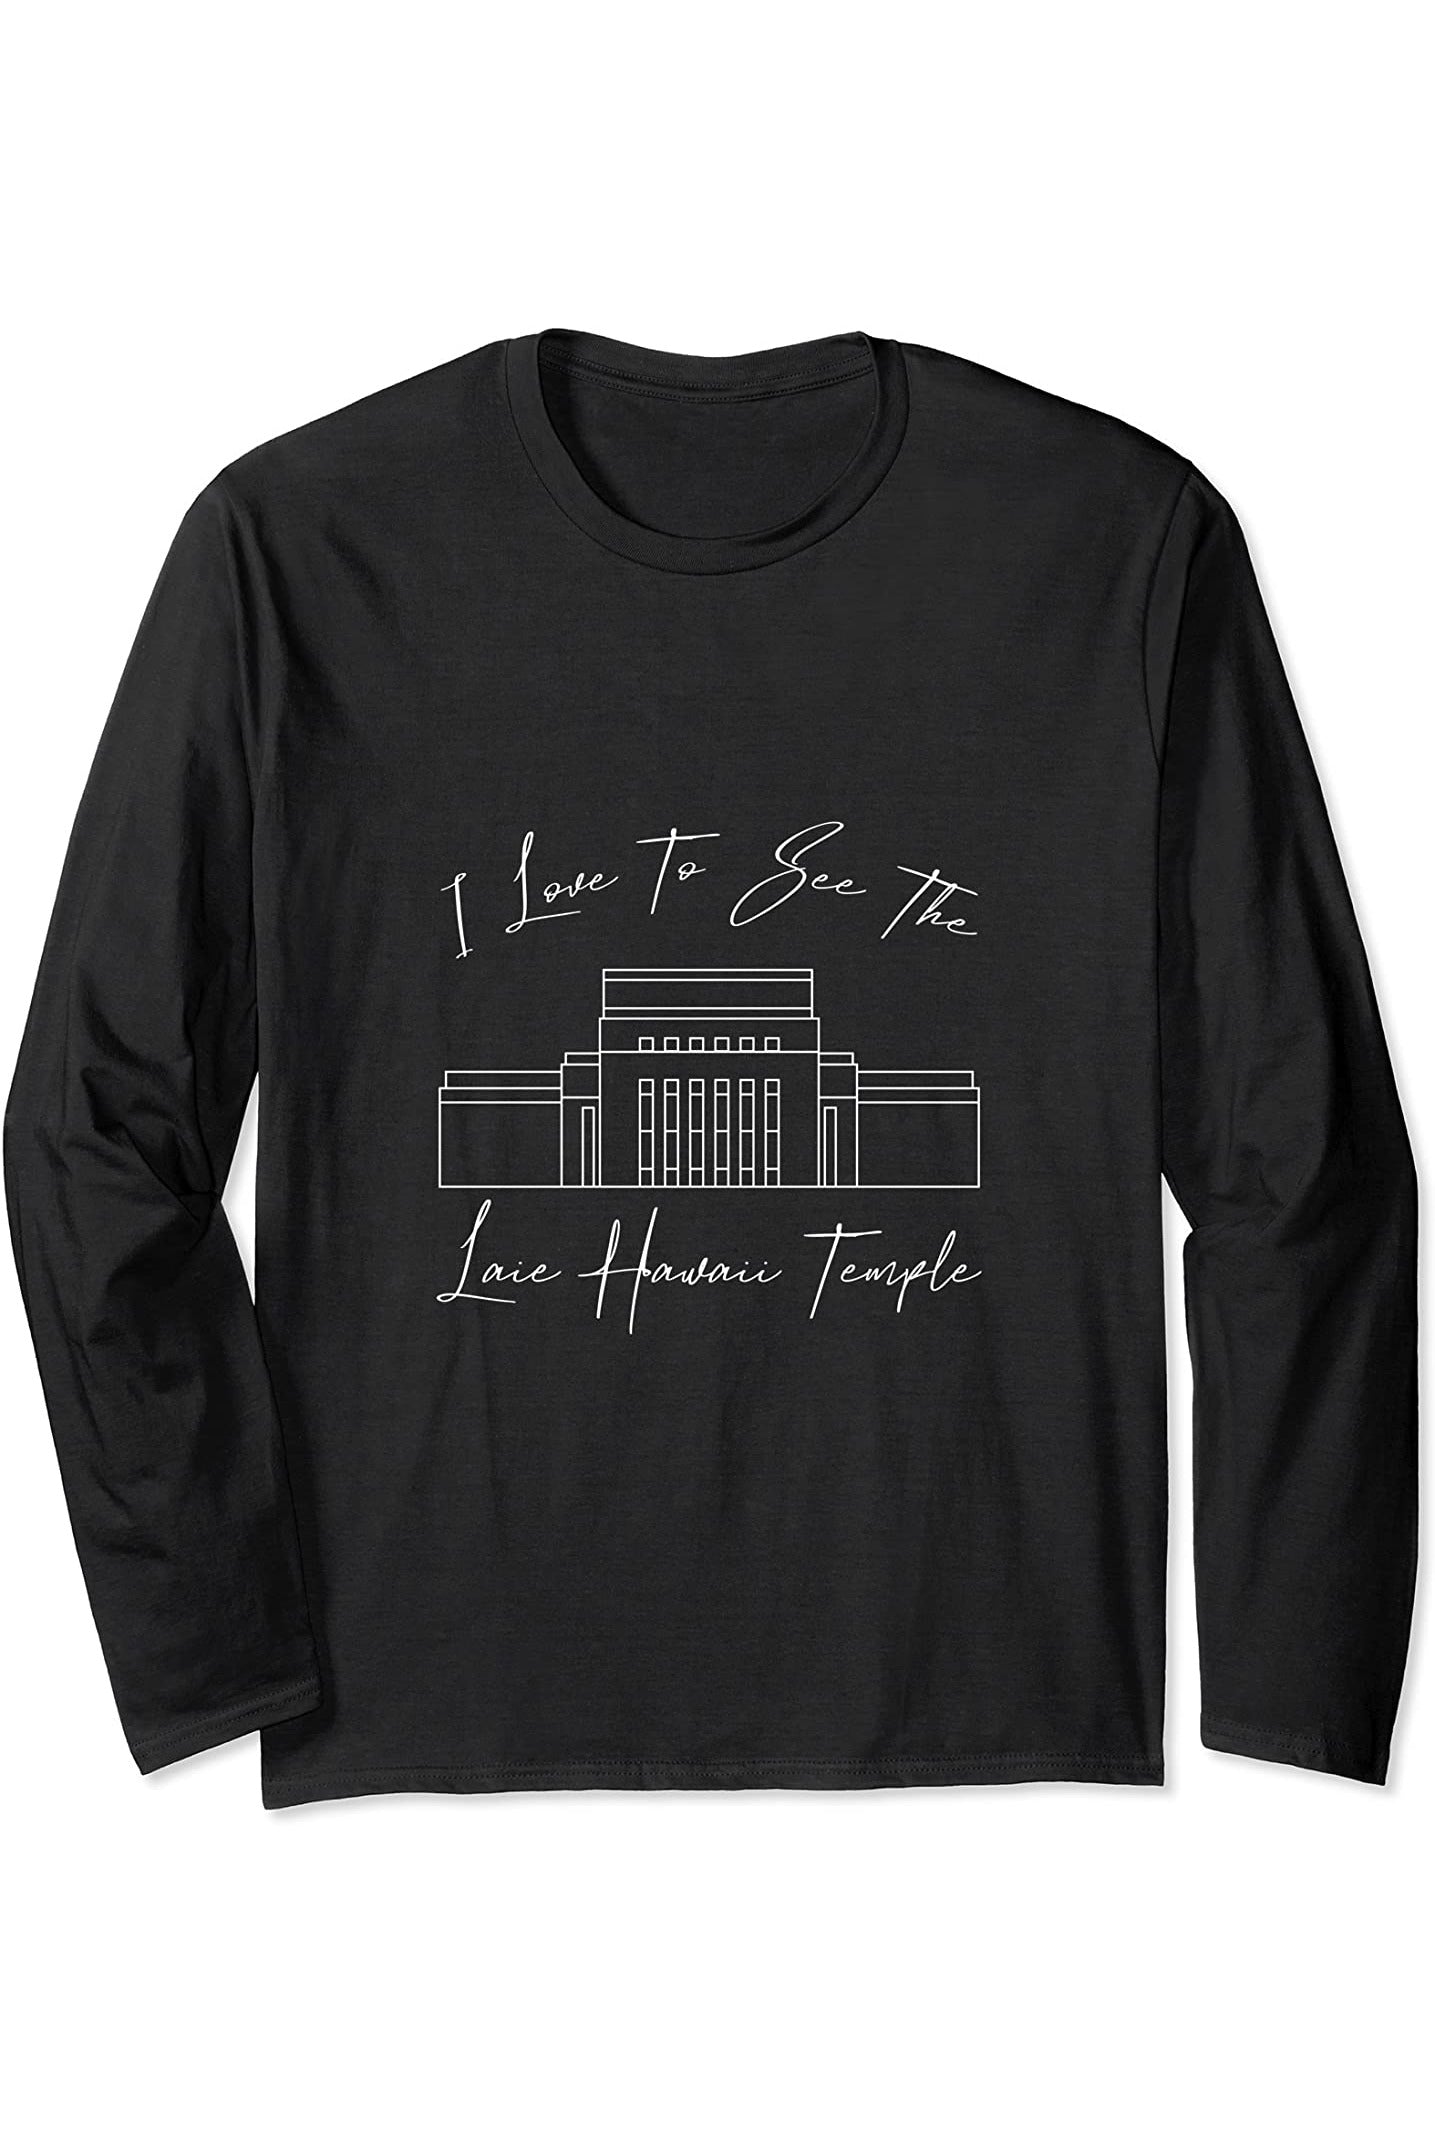 Laie Hawaii Temple Long Sleeve T-Shirt - Calligraphy Style (English) US